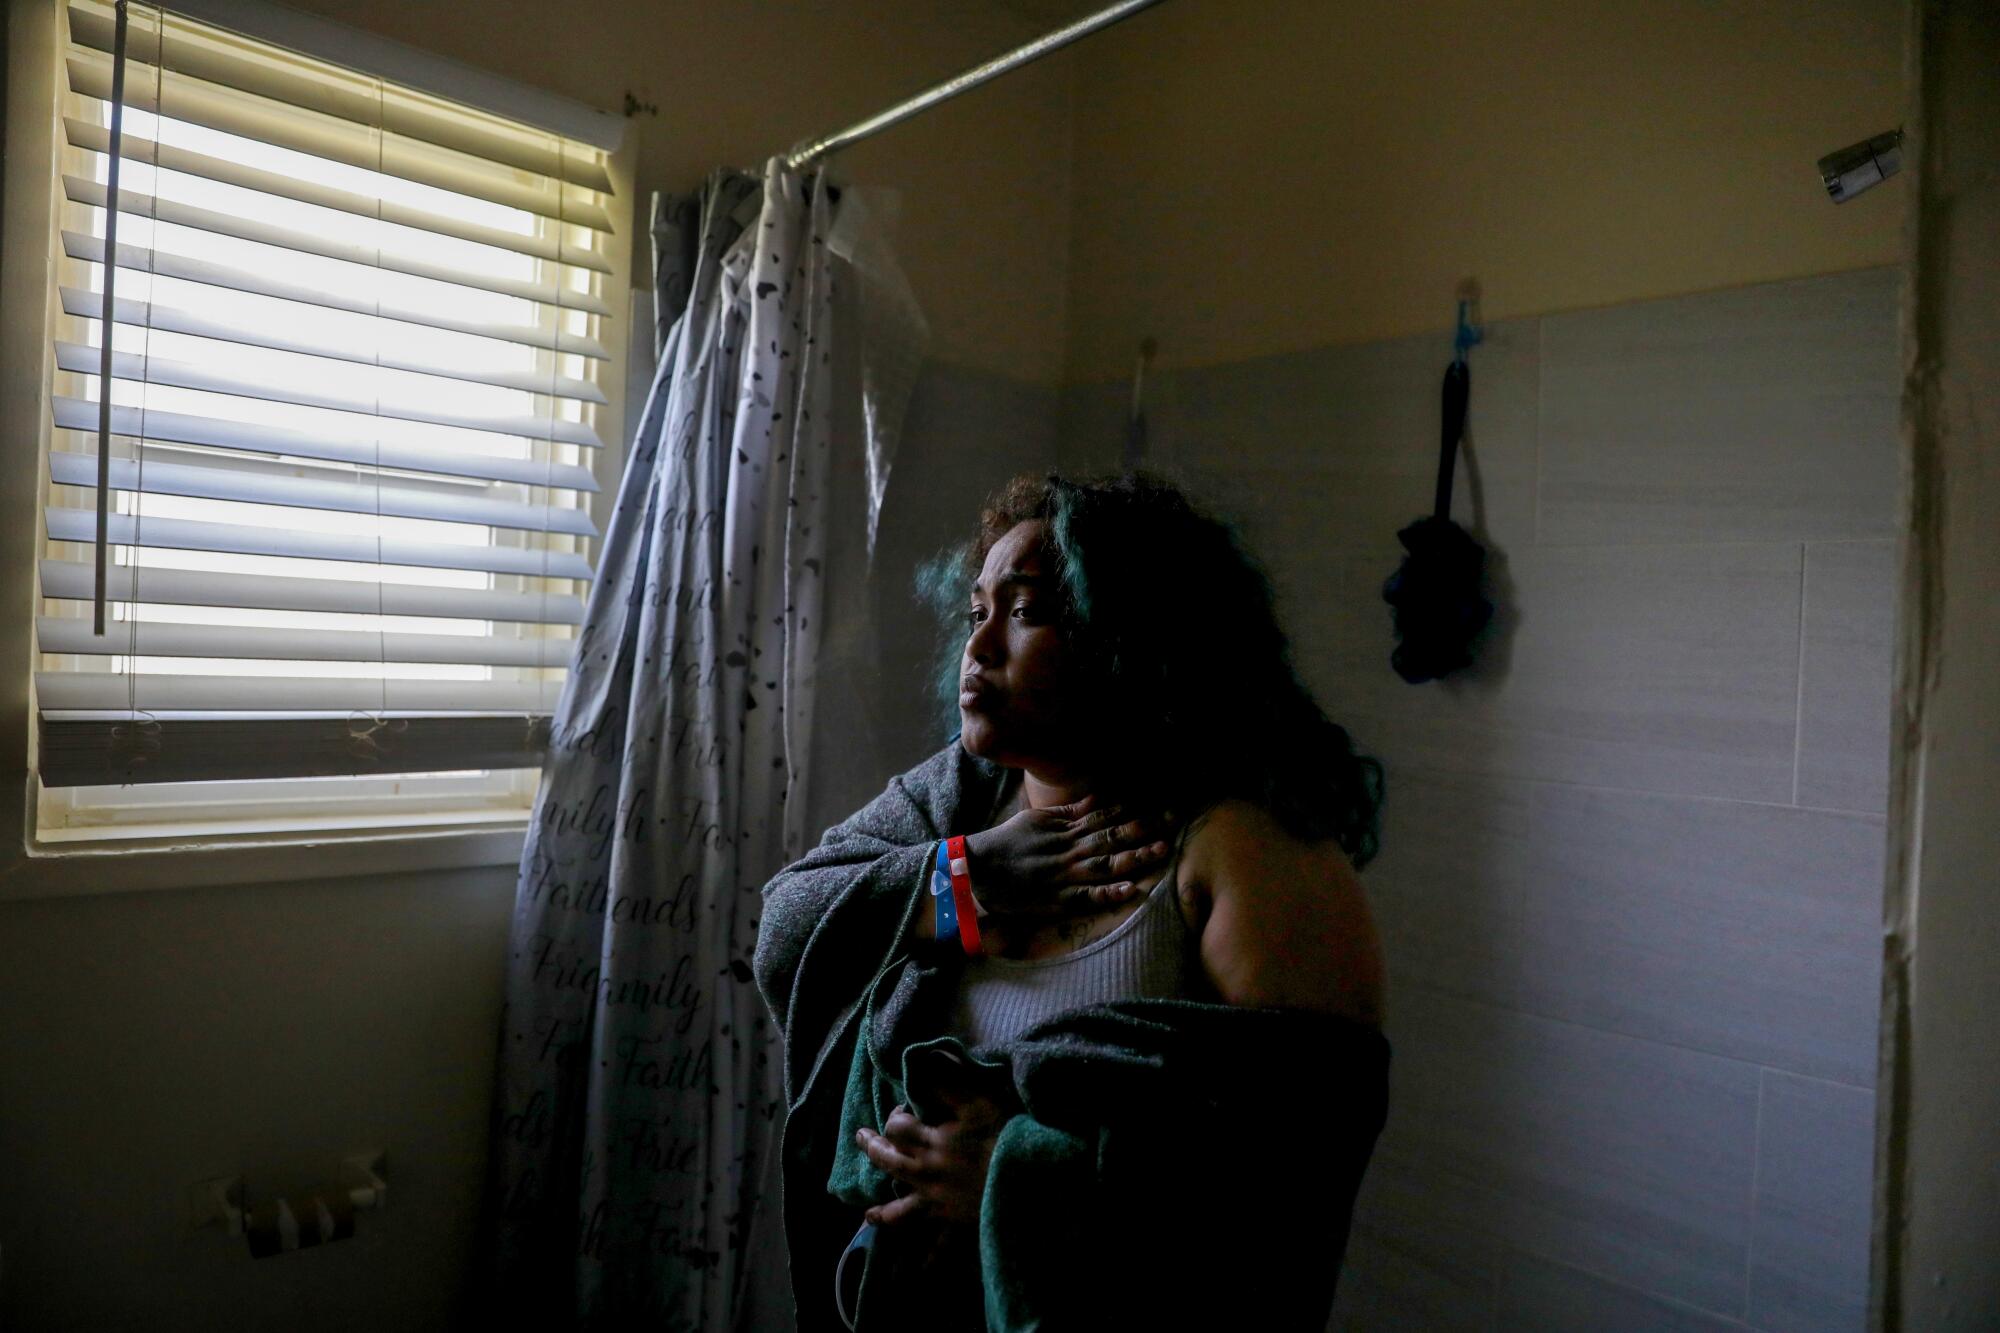 Sabrina Dolan looks out a window in her unit at Chesapeake Apartments in South L.A.